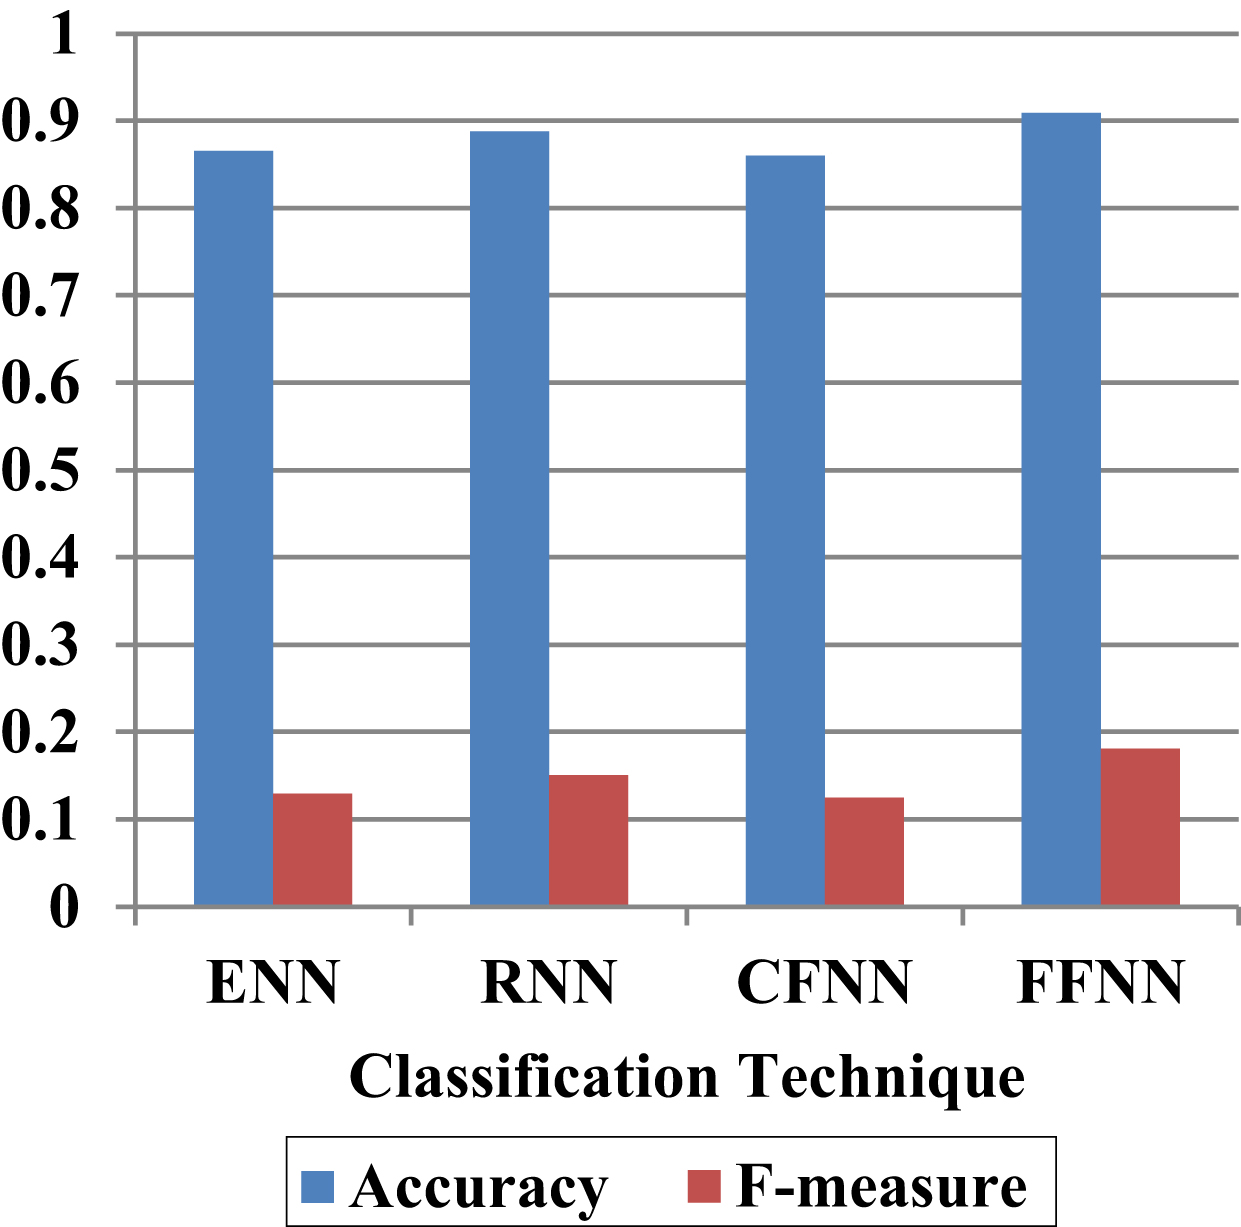 Performance Evaluation of Proposed FFNN With Financial Derivative Features for 80% -20% of available dataset.